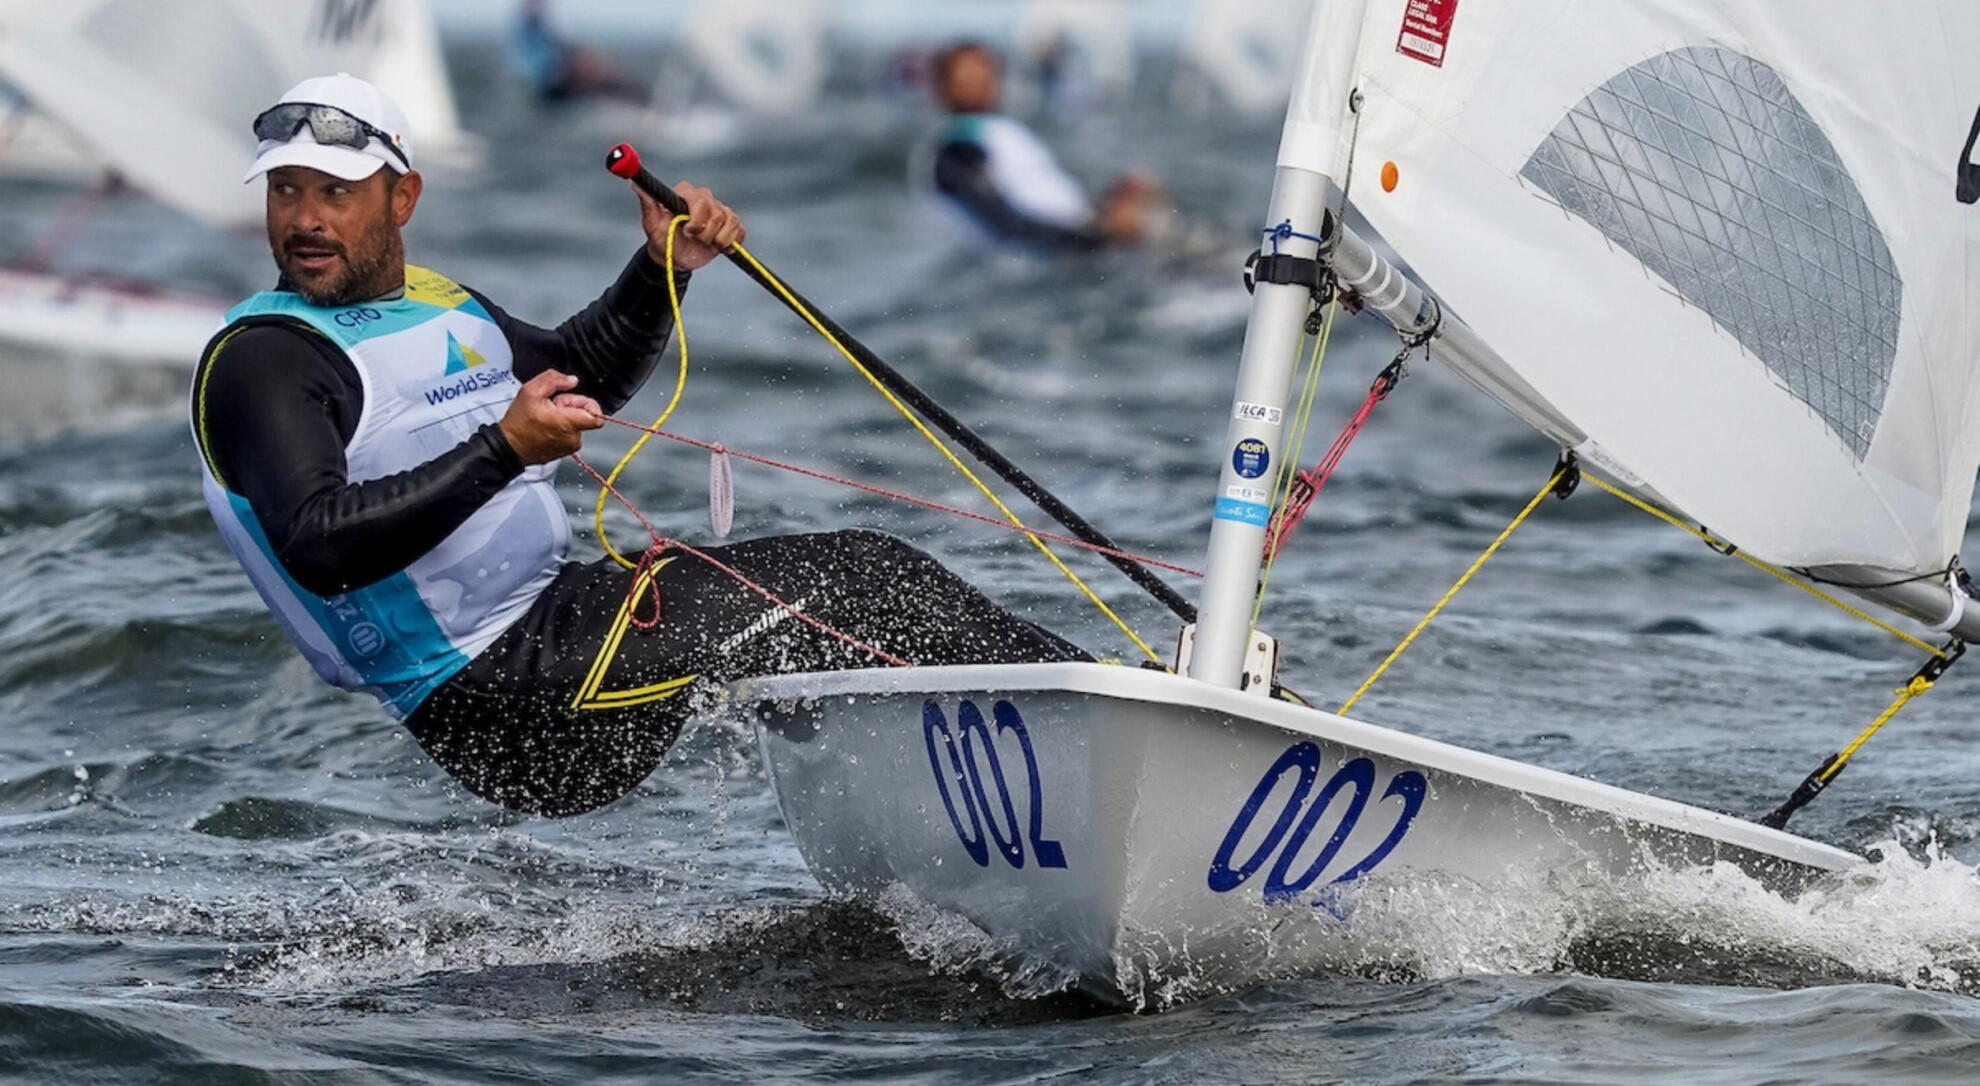 Olympic gold medallist Wearn hoping to find form at Sailing World Championships